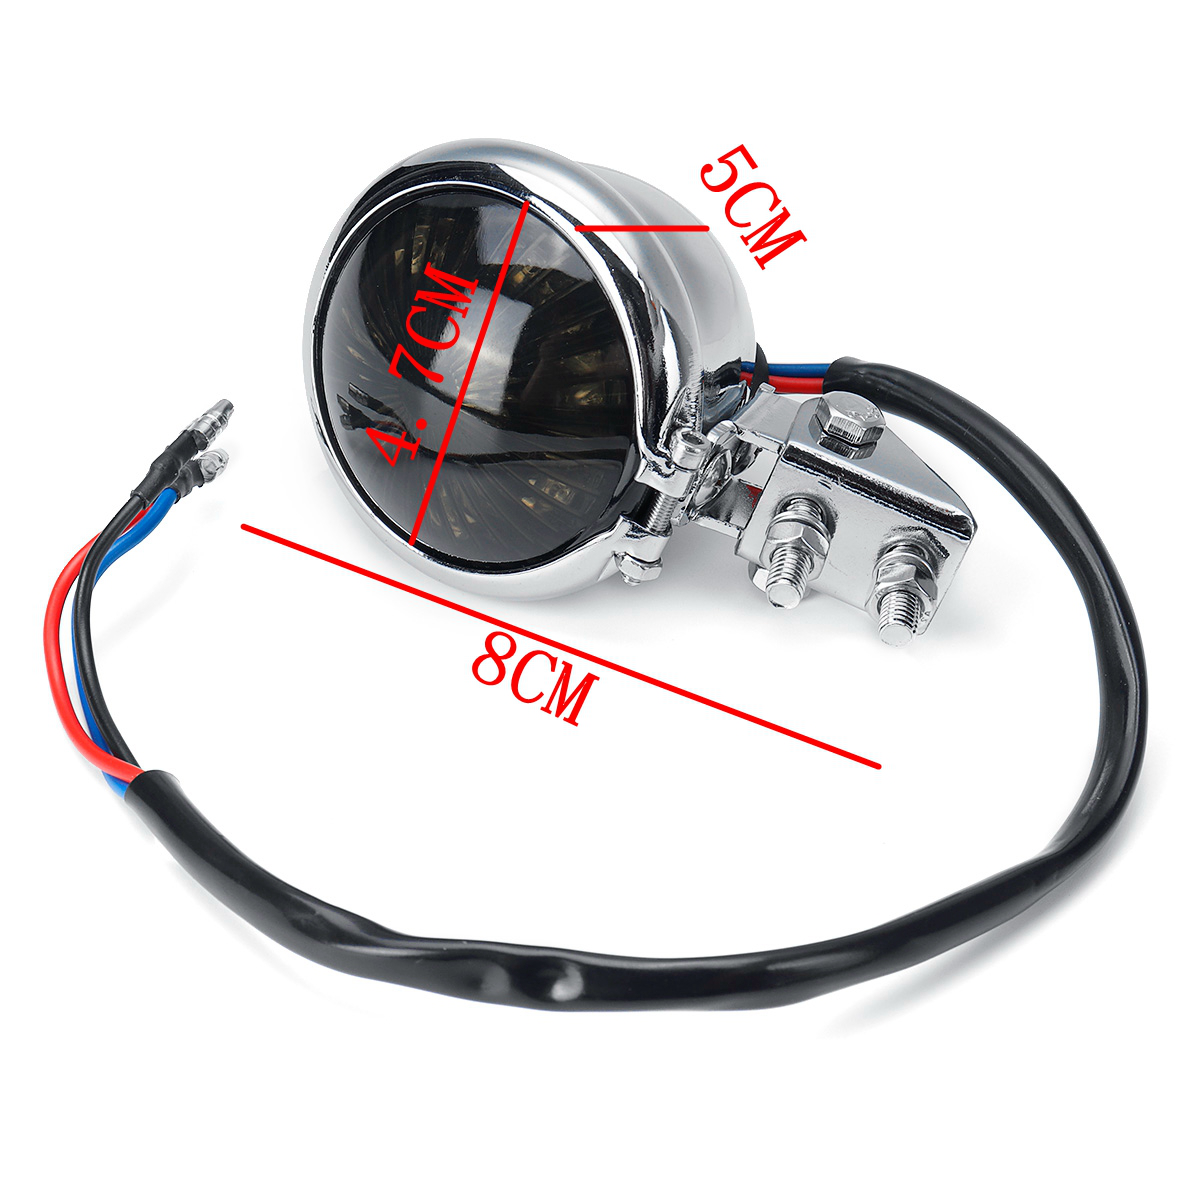 12V Motorcycle Smoke Rear Brake Stop Red Tail Light for Harley Chopper Cafe Racer - Auto GoShop